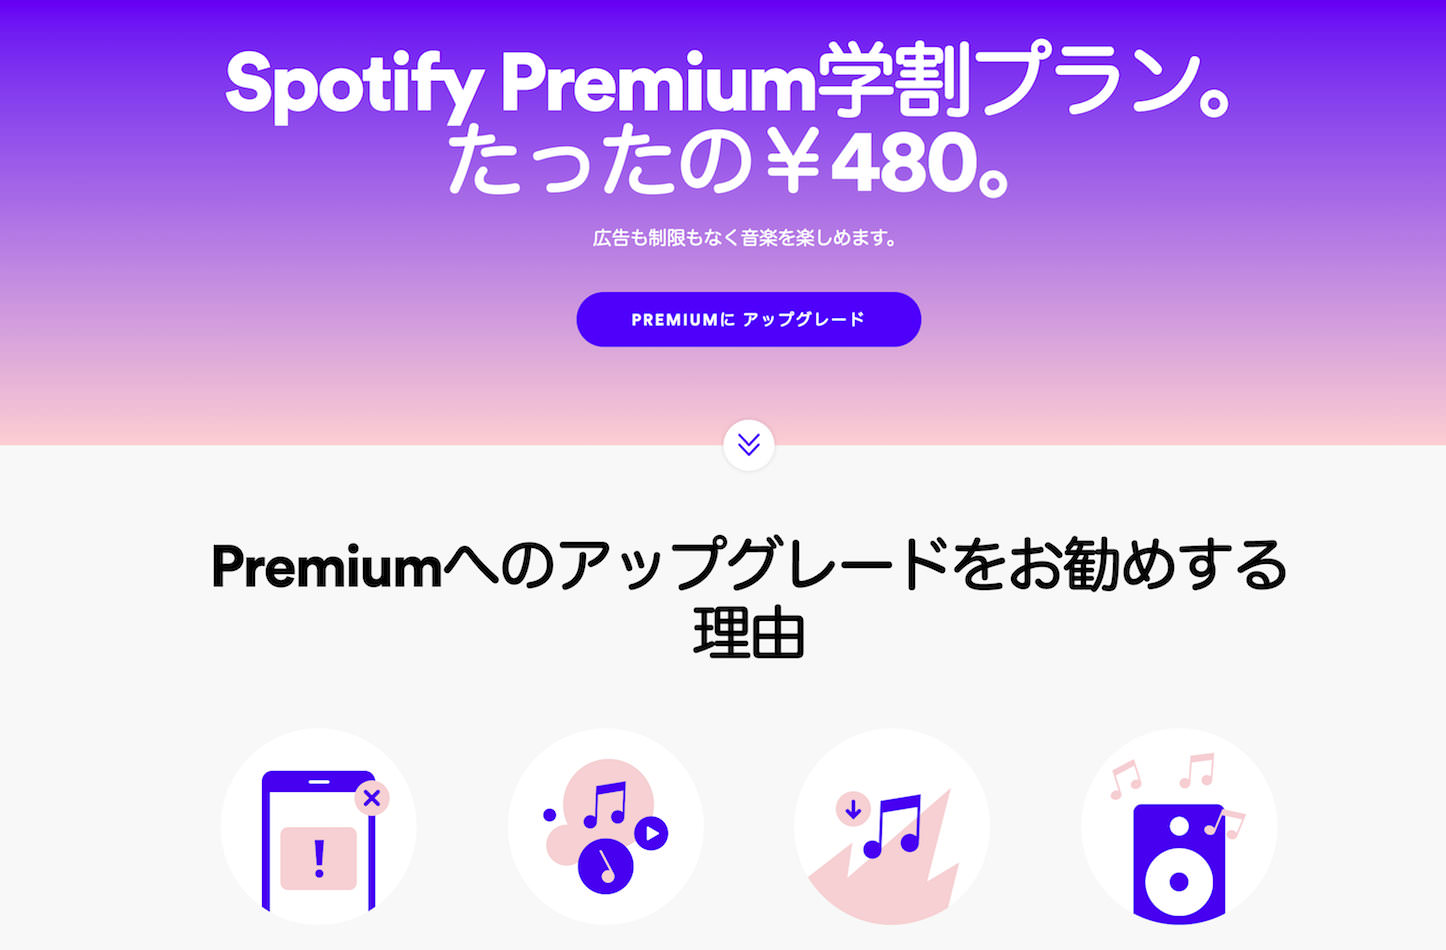 Spotify-for-Students.jpg